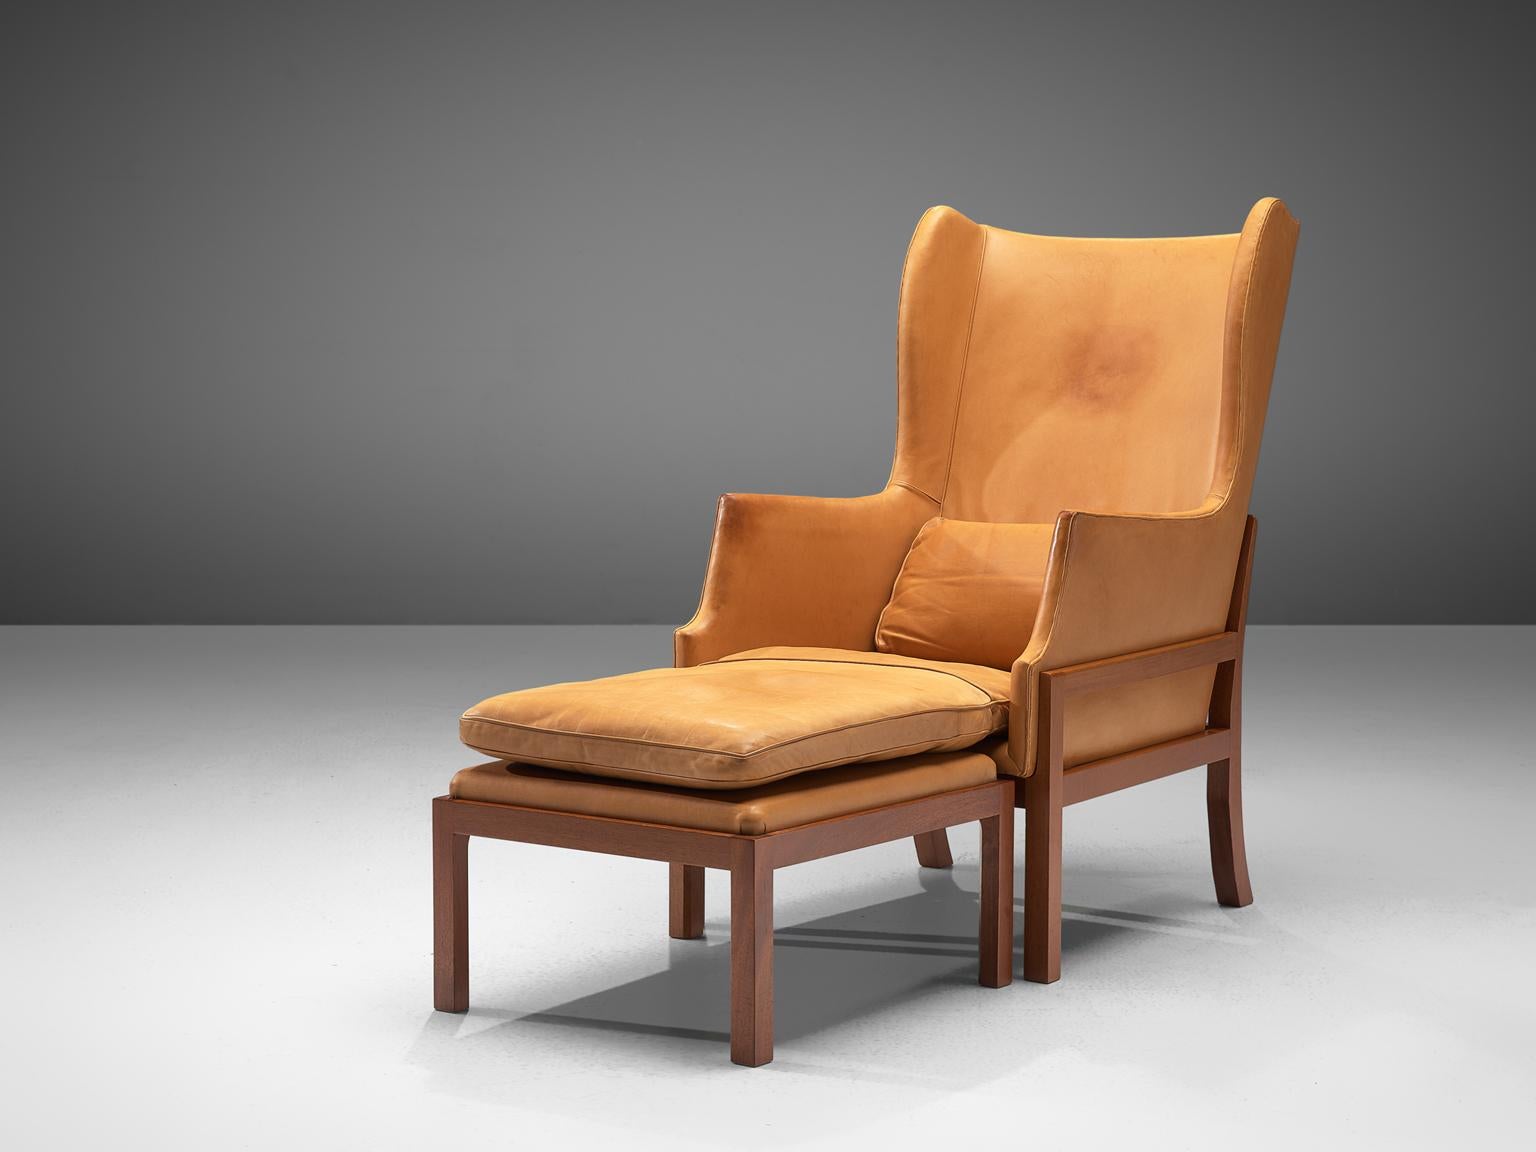 Mogens Koch for Rud Rasmussen, wingback chair and ottoman model MK50, mahogany and leather, Denmark, 1936.

Elegant and comfortable armchair in mahogany and light cognac leather by Mogens Koch. This lounge chair was designed with high attention to